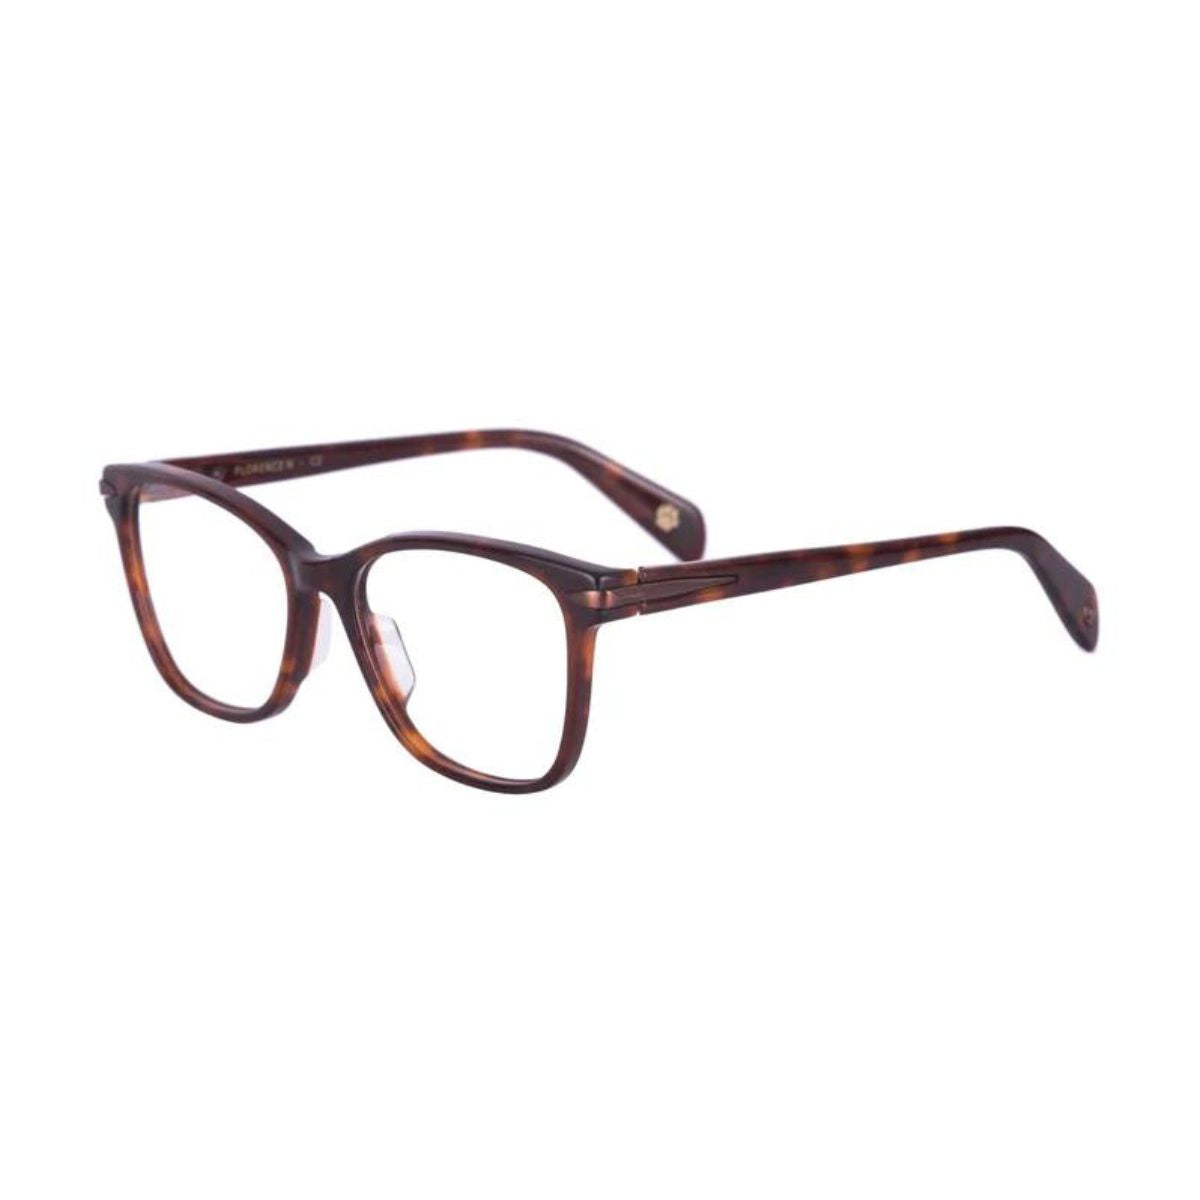 "shop The Monk Florence C2  spectacle eyewear frame for women's online at optorium"